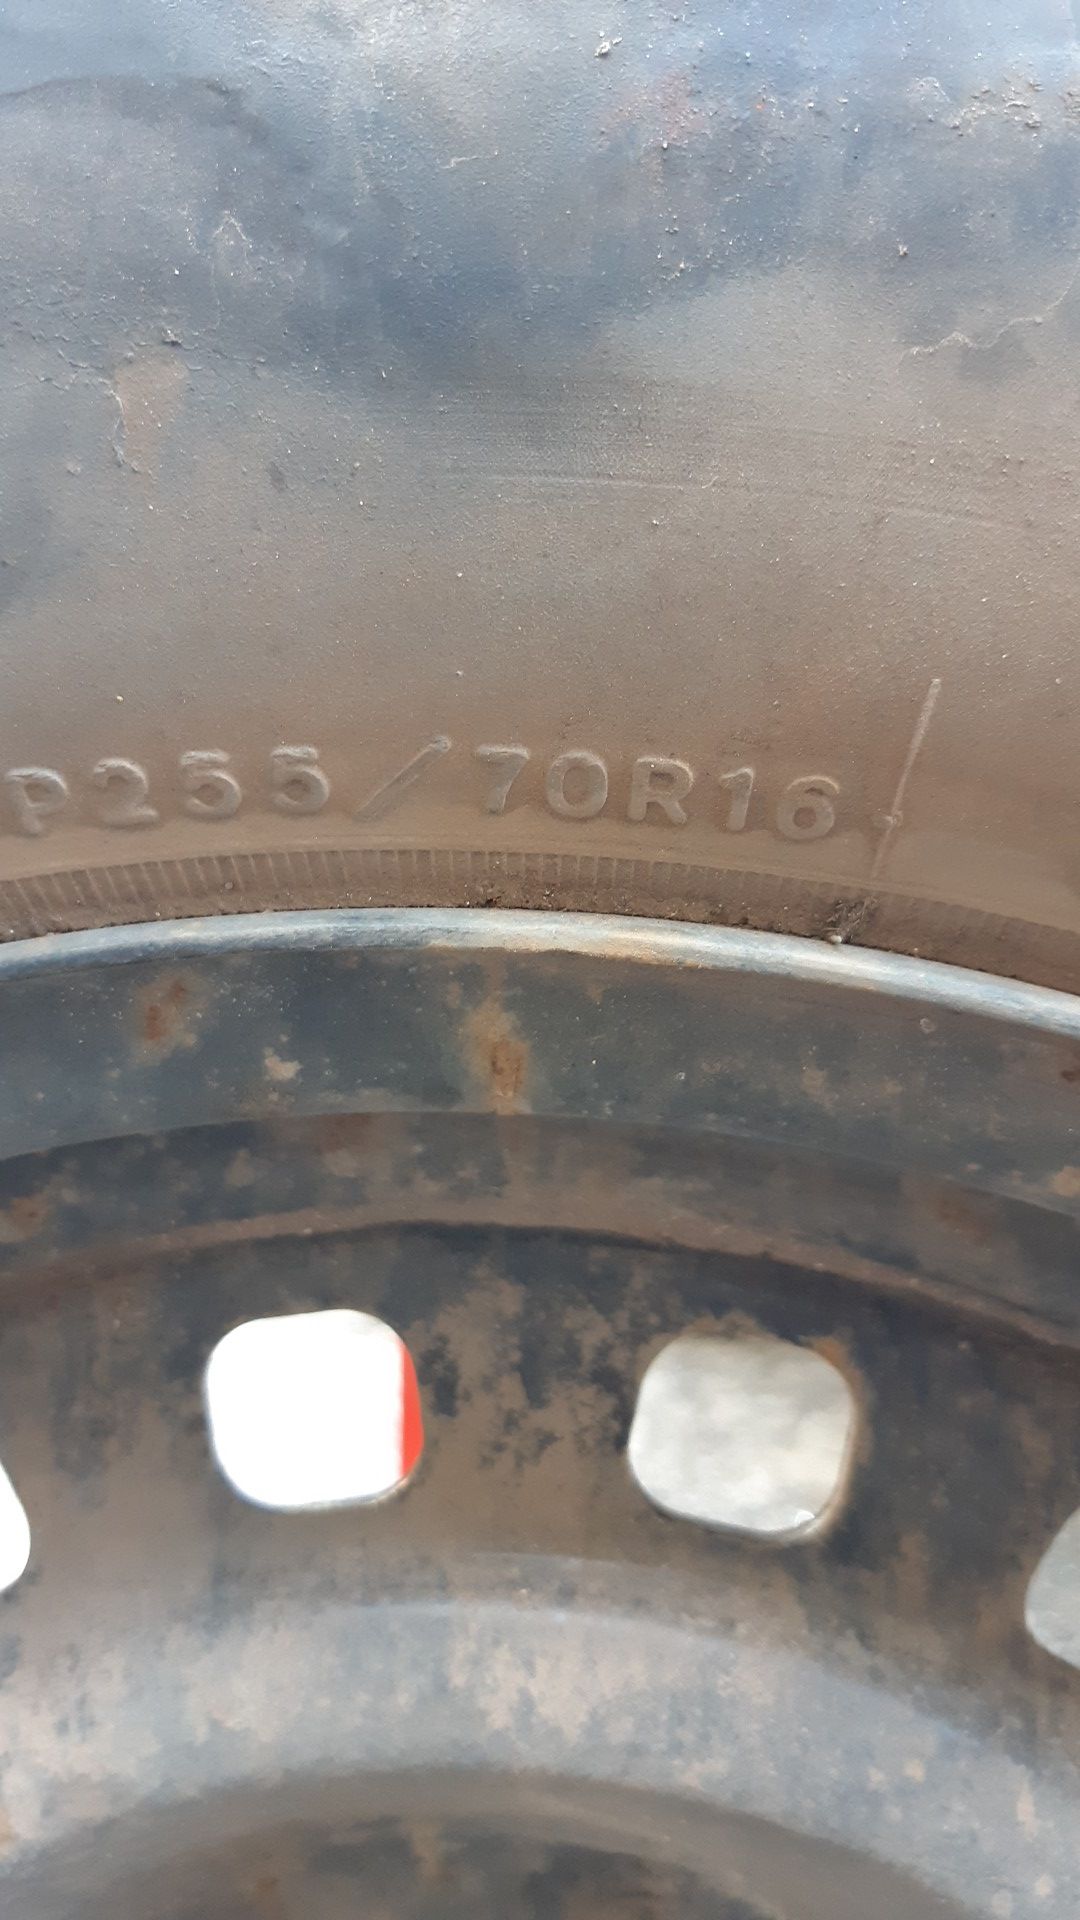 2 never used P225/70R16 tires